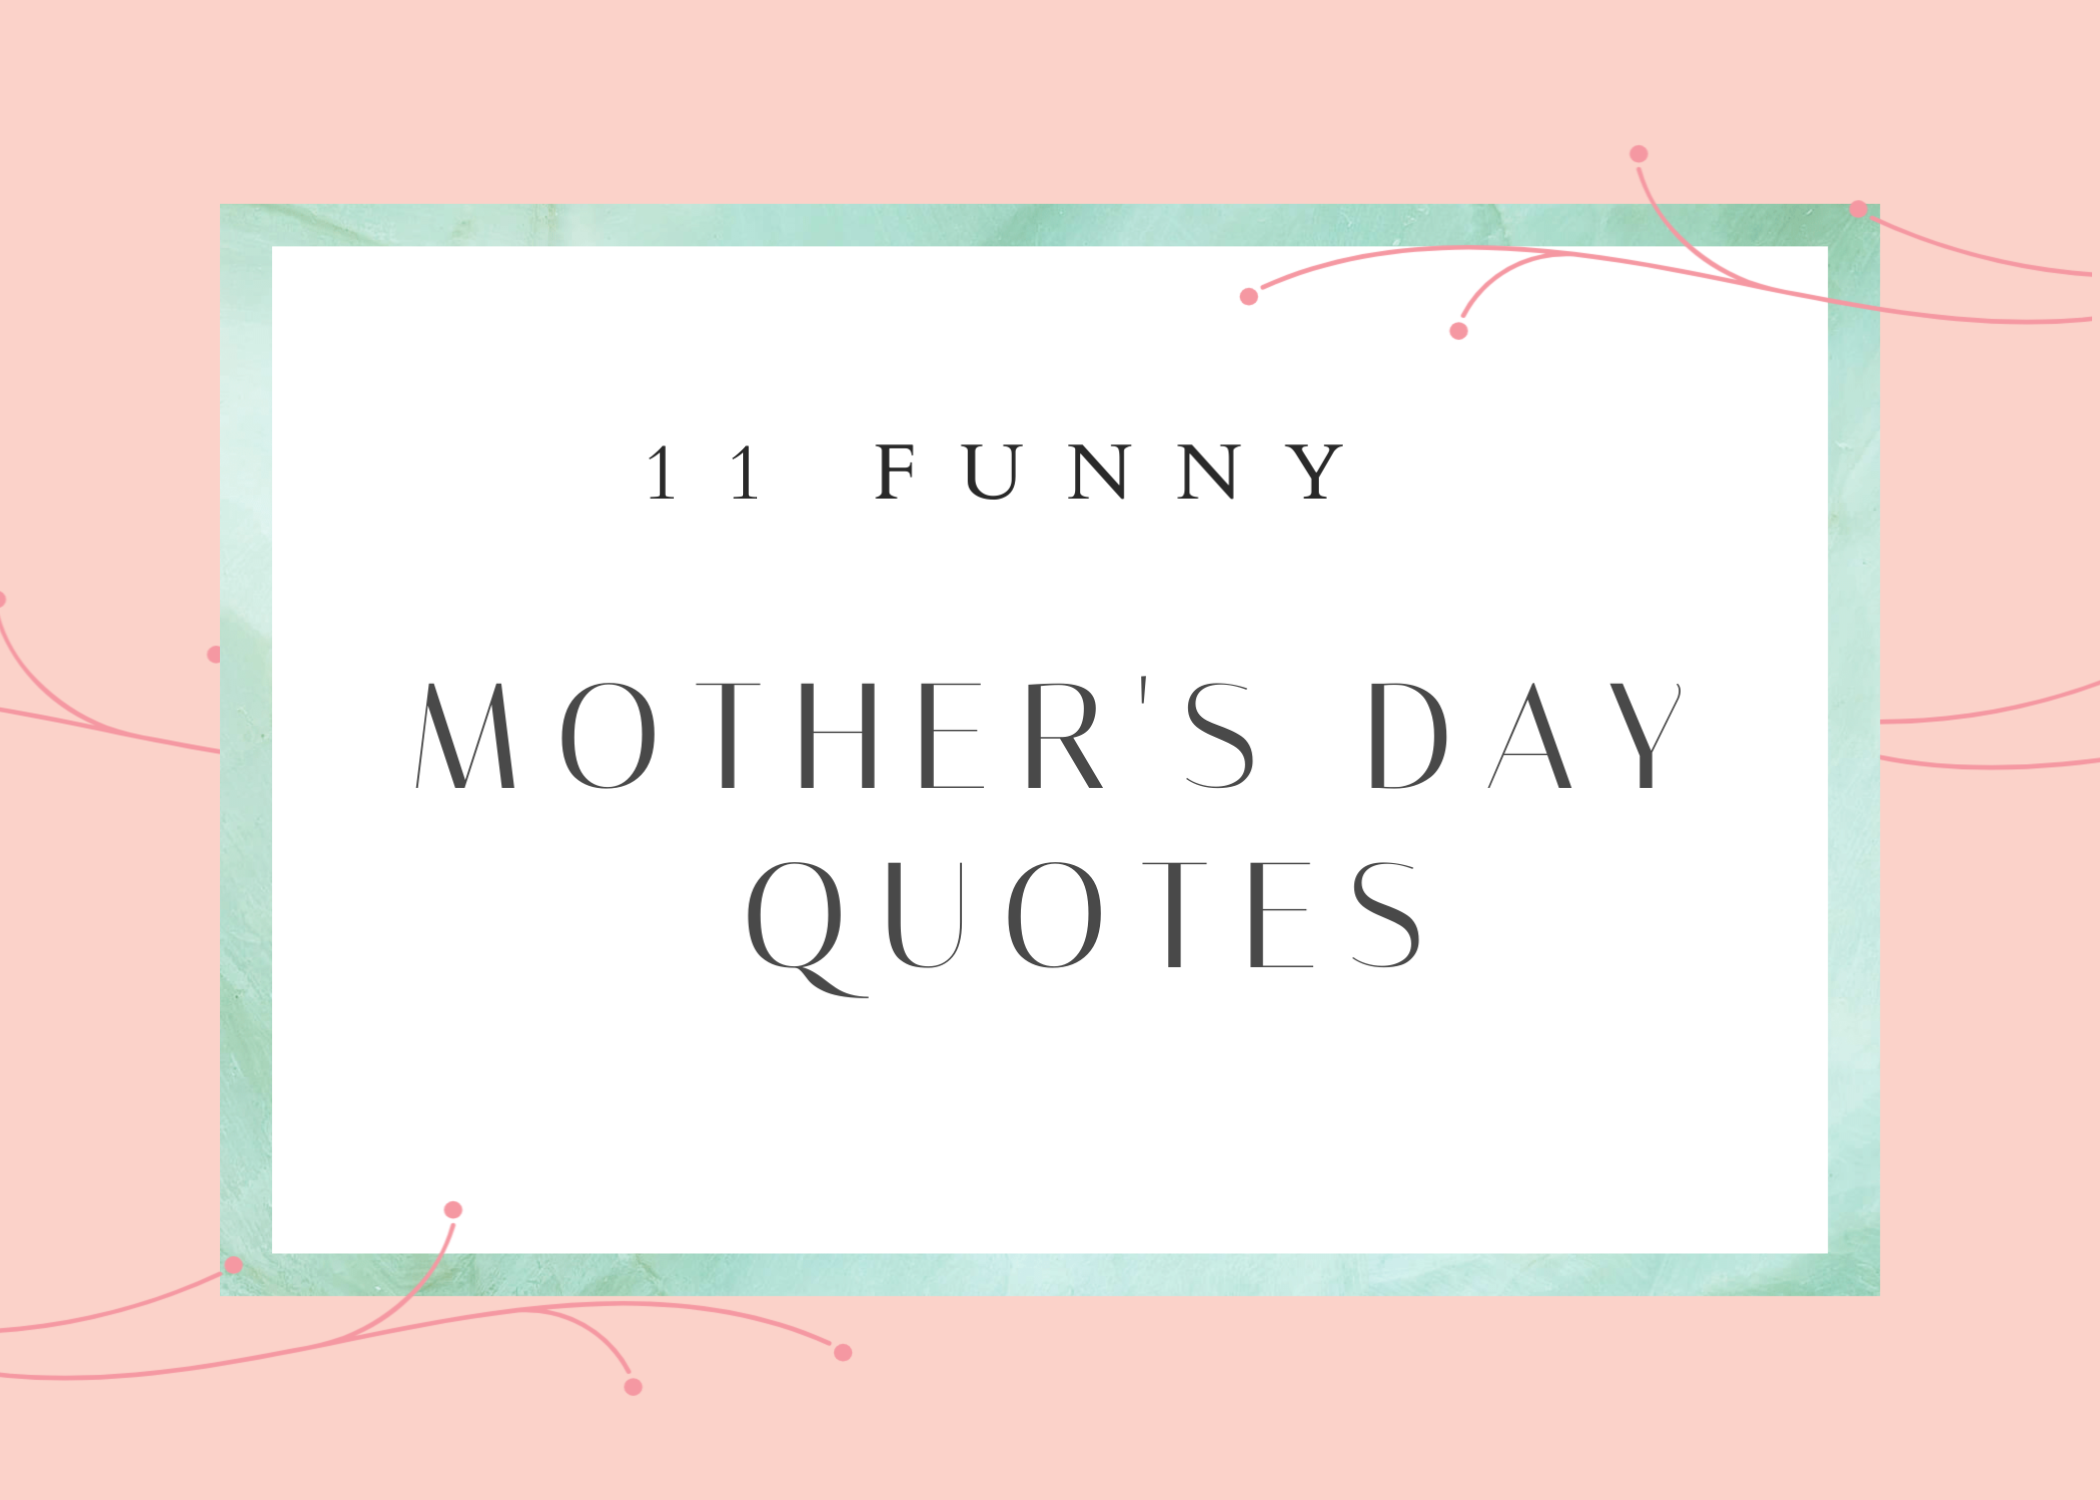 11 Funny Mother’s Day Quotes to Celebrate Mom